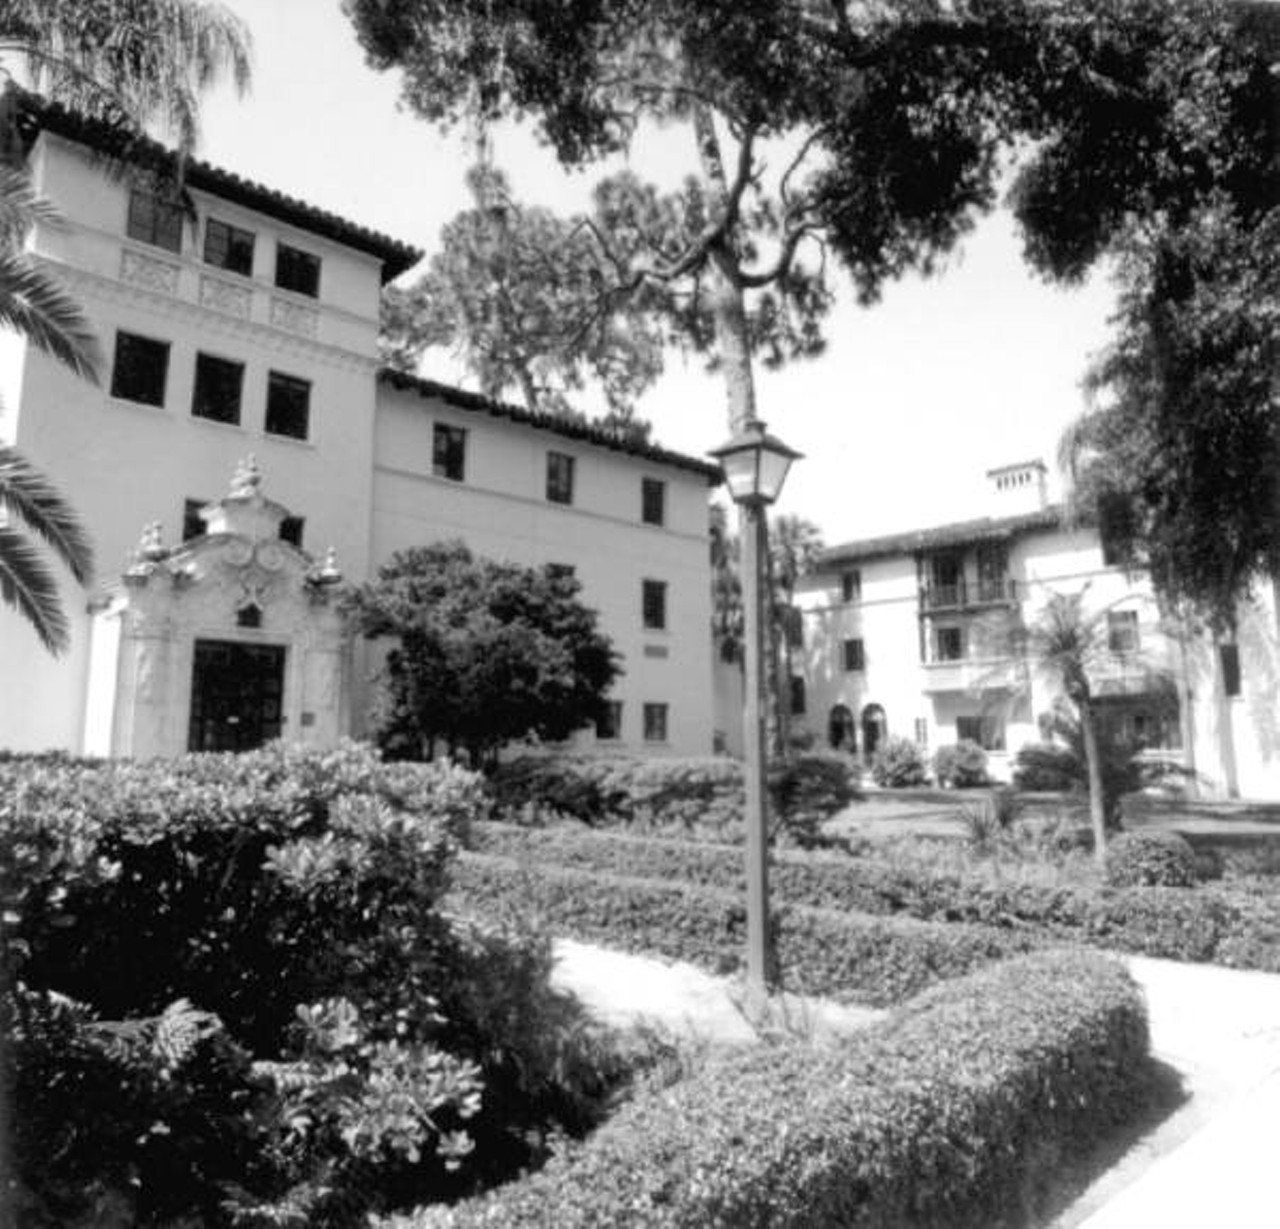 Rollins College was the first college in the area, founded back in 1885 by New England Congregationalists. It is now the oldest college in Florida.
Photo via Florida Memory